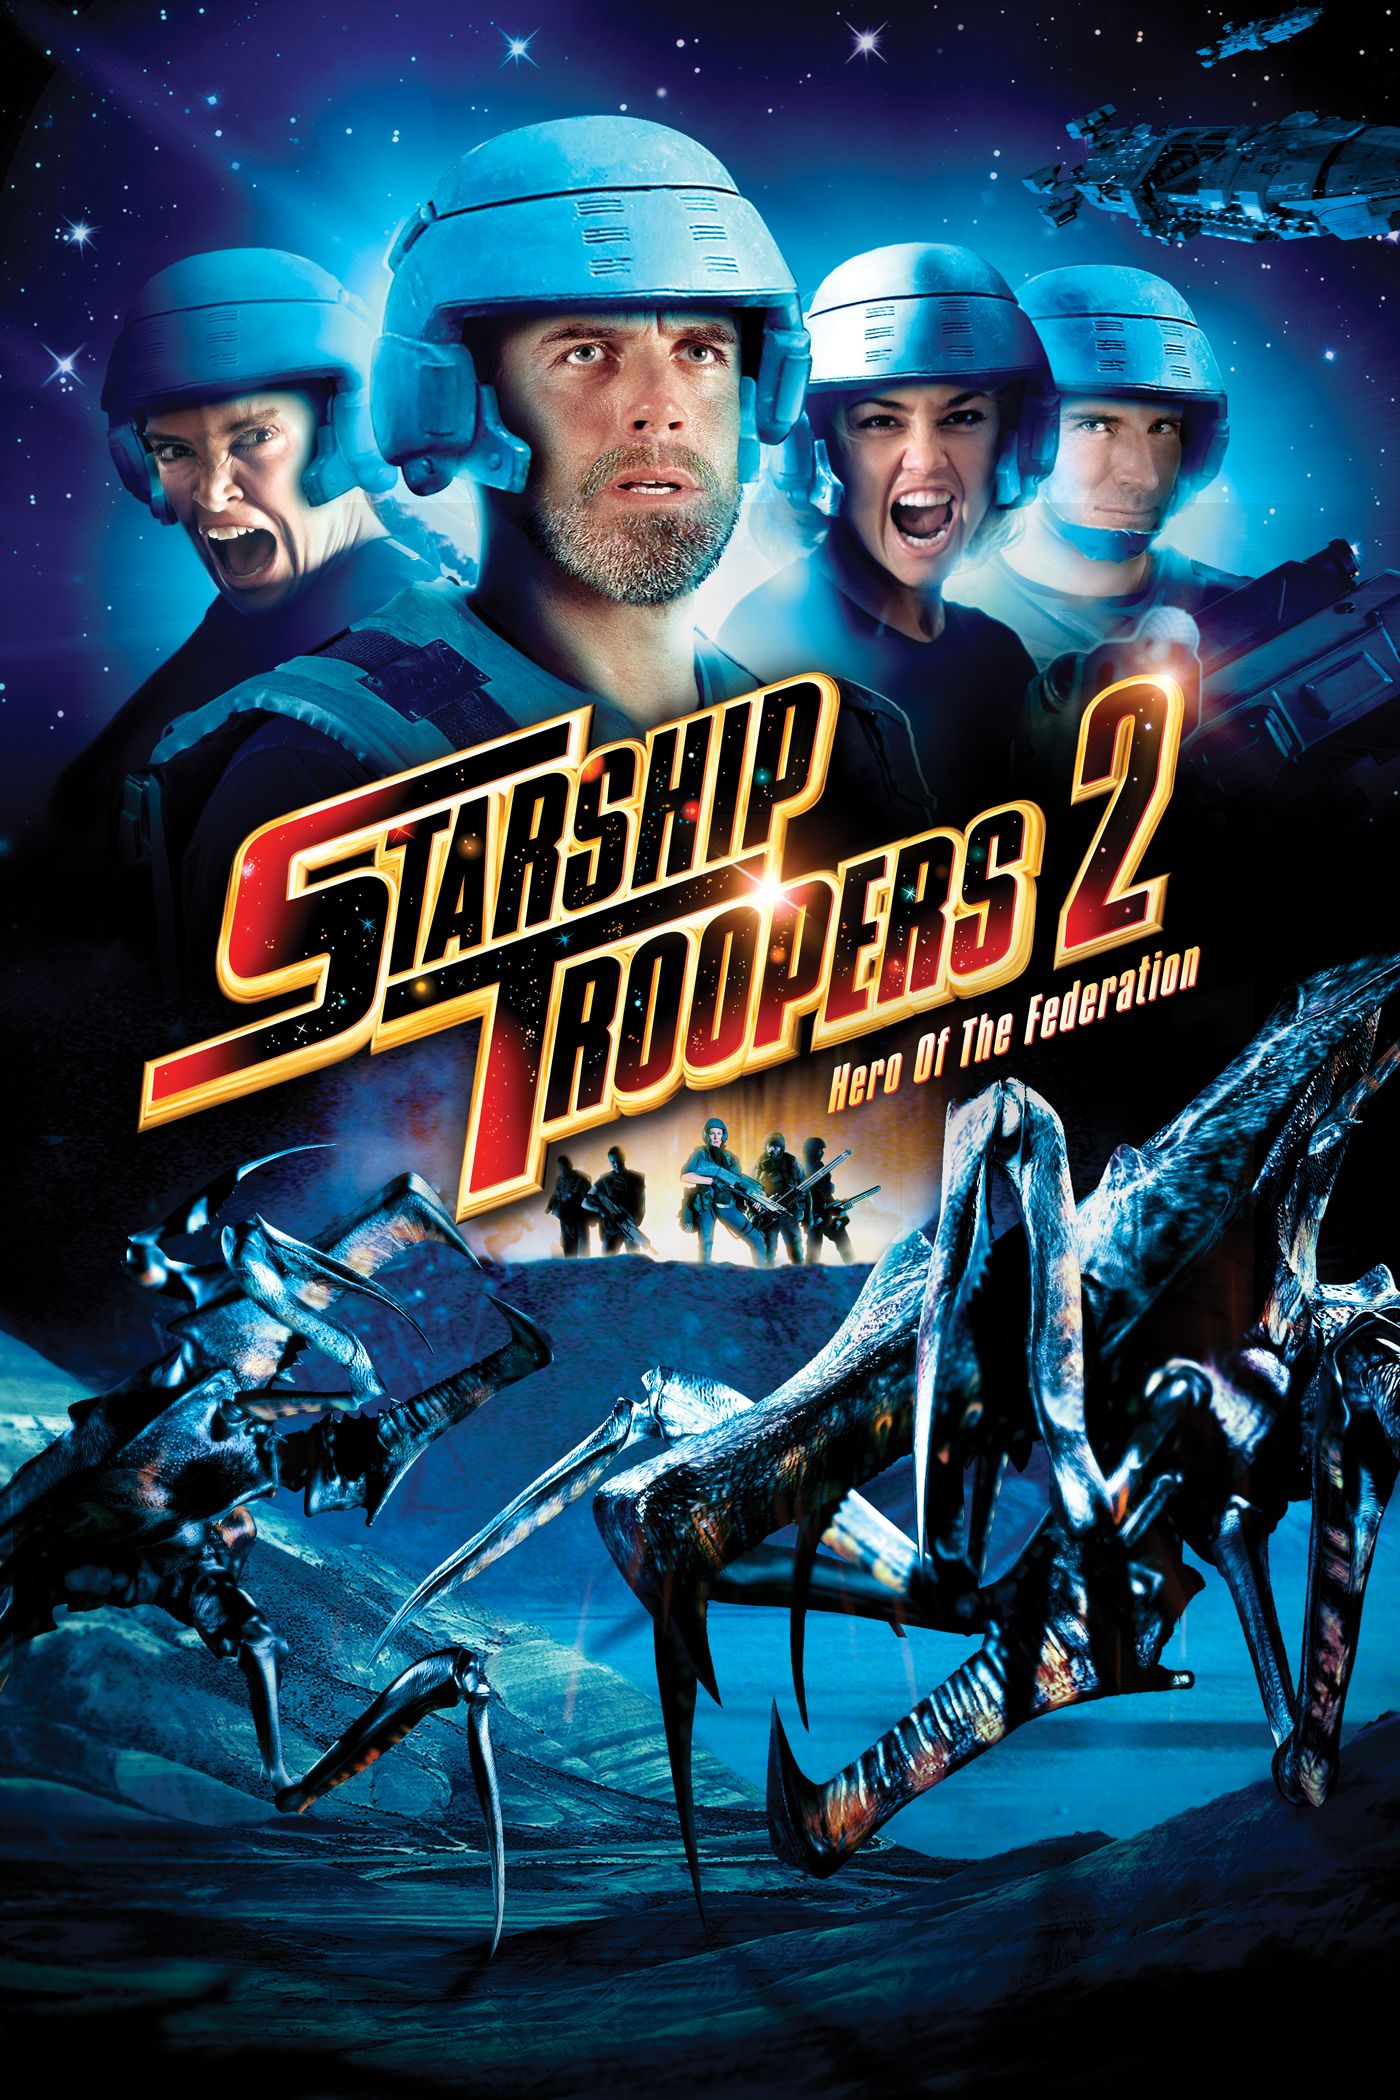 chetan dighe recommends Starship Troopers 2 Free